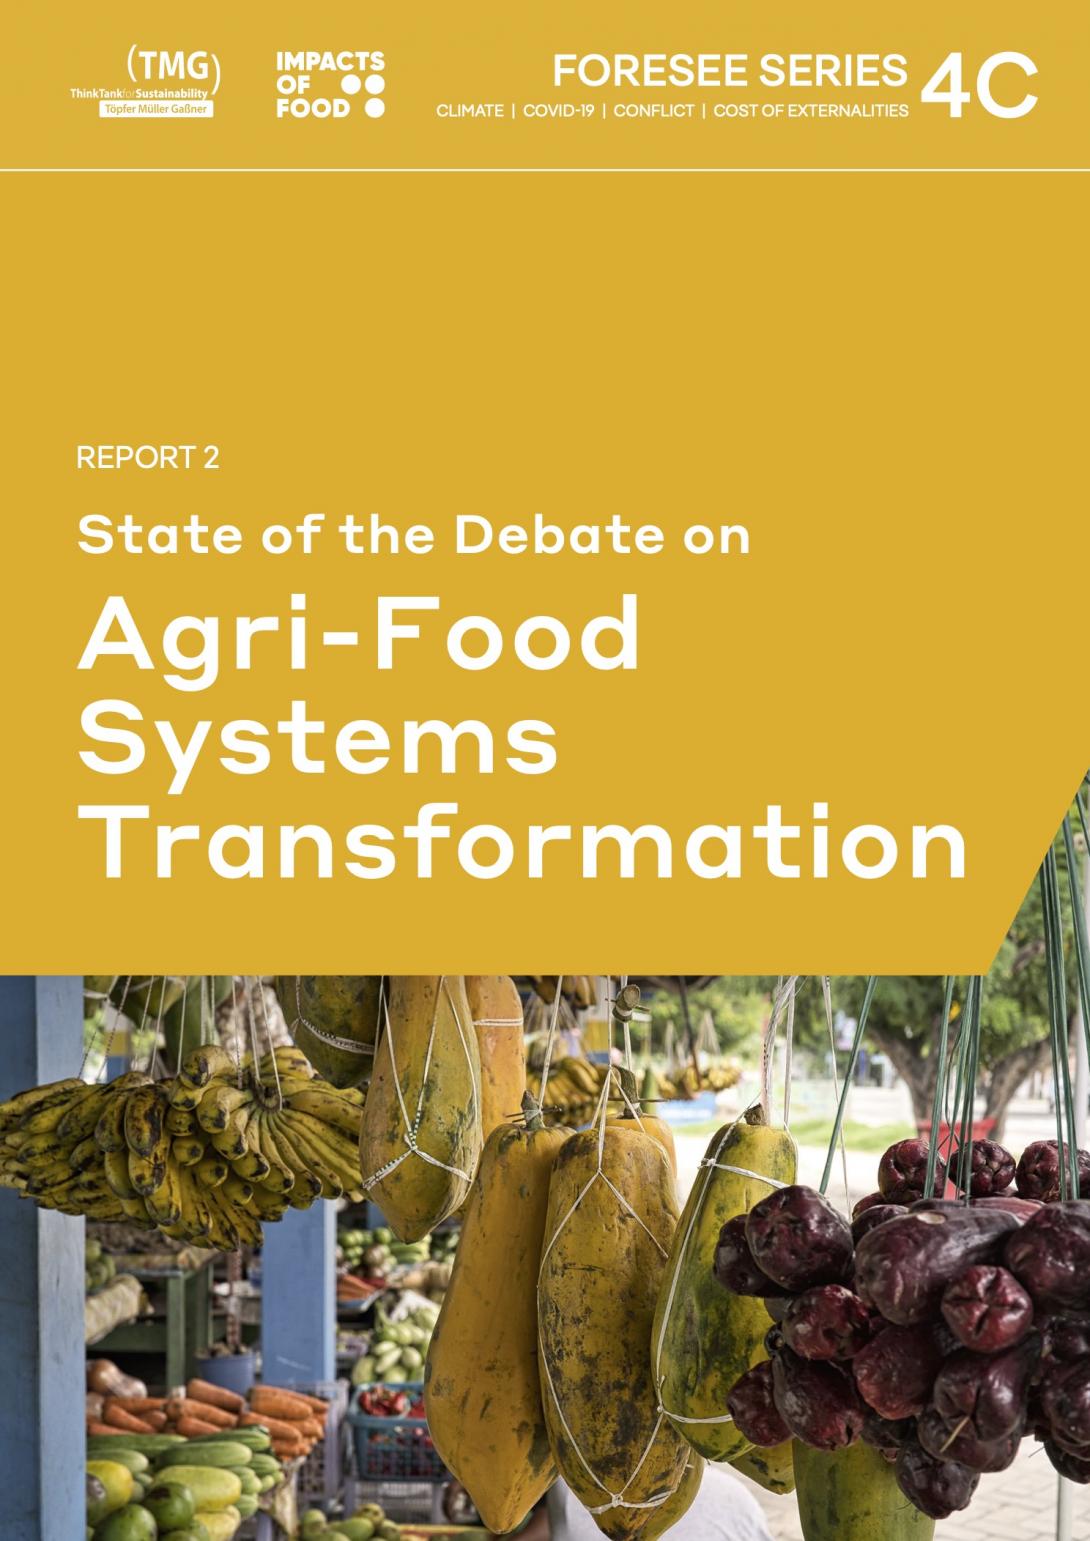 State of the Debate on Agri-Food Systems Transformation